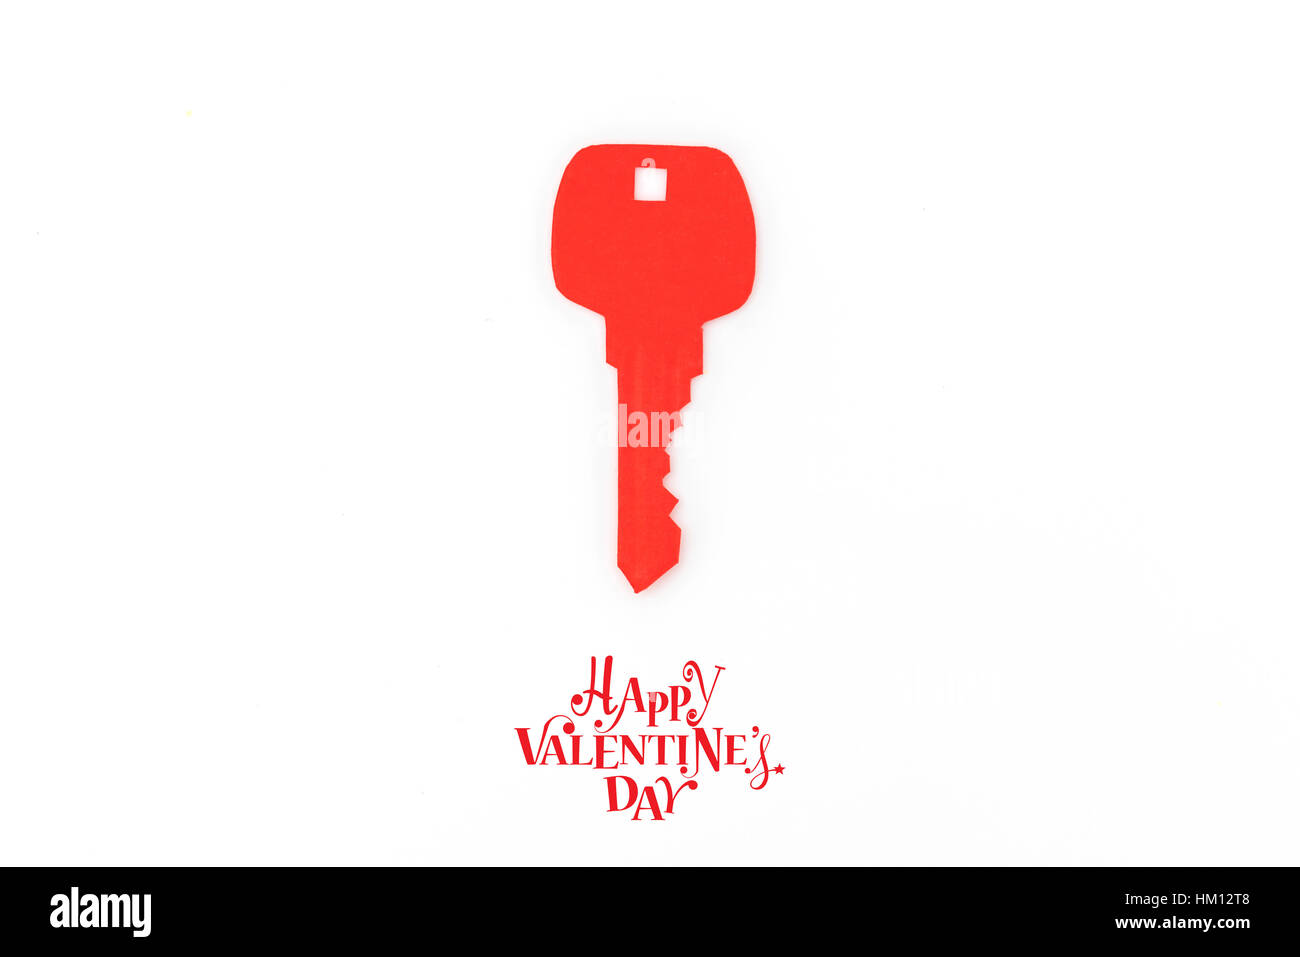 Paper cut of Key for heart as a symbol of love Stock Photo